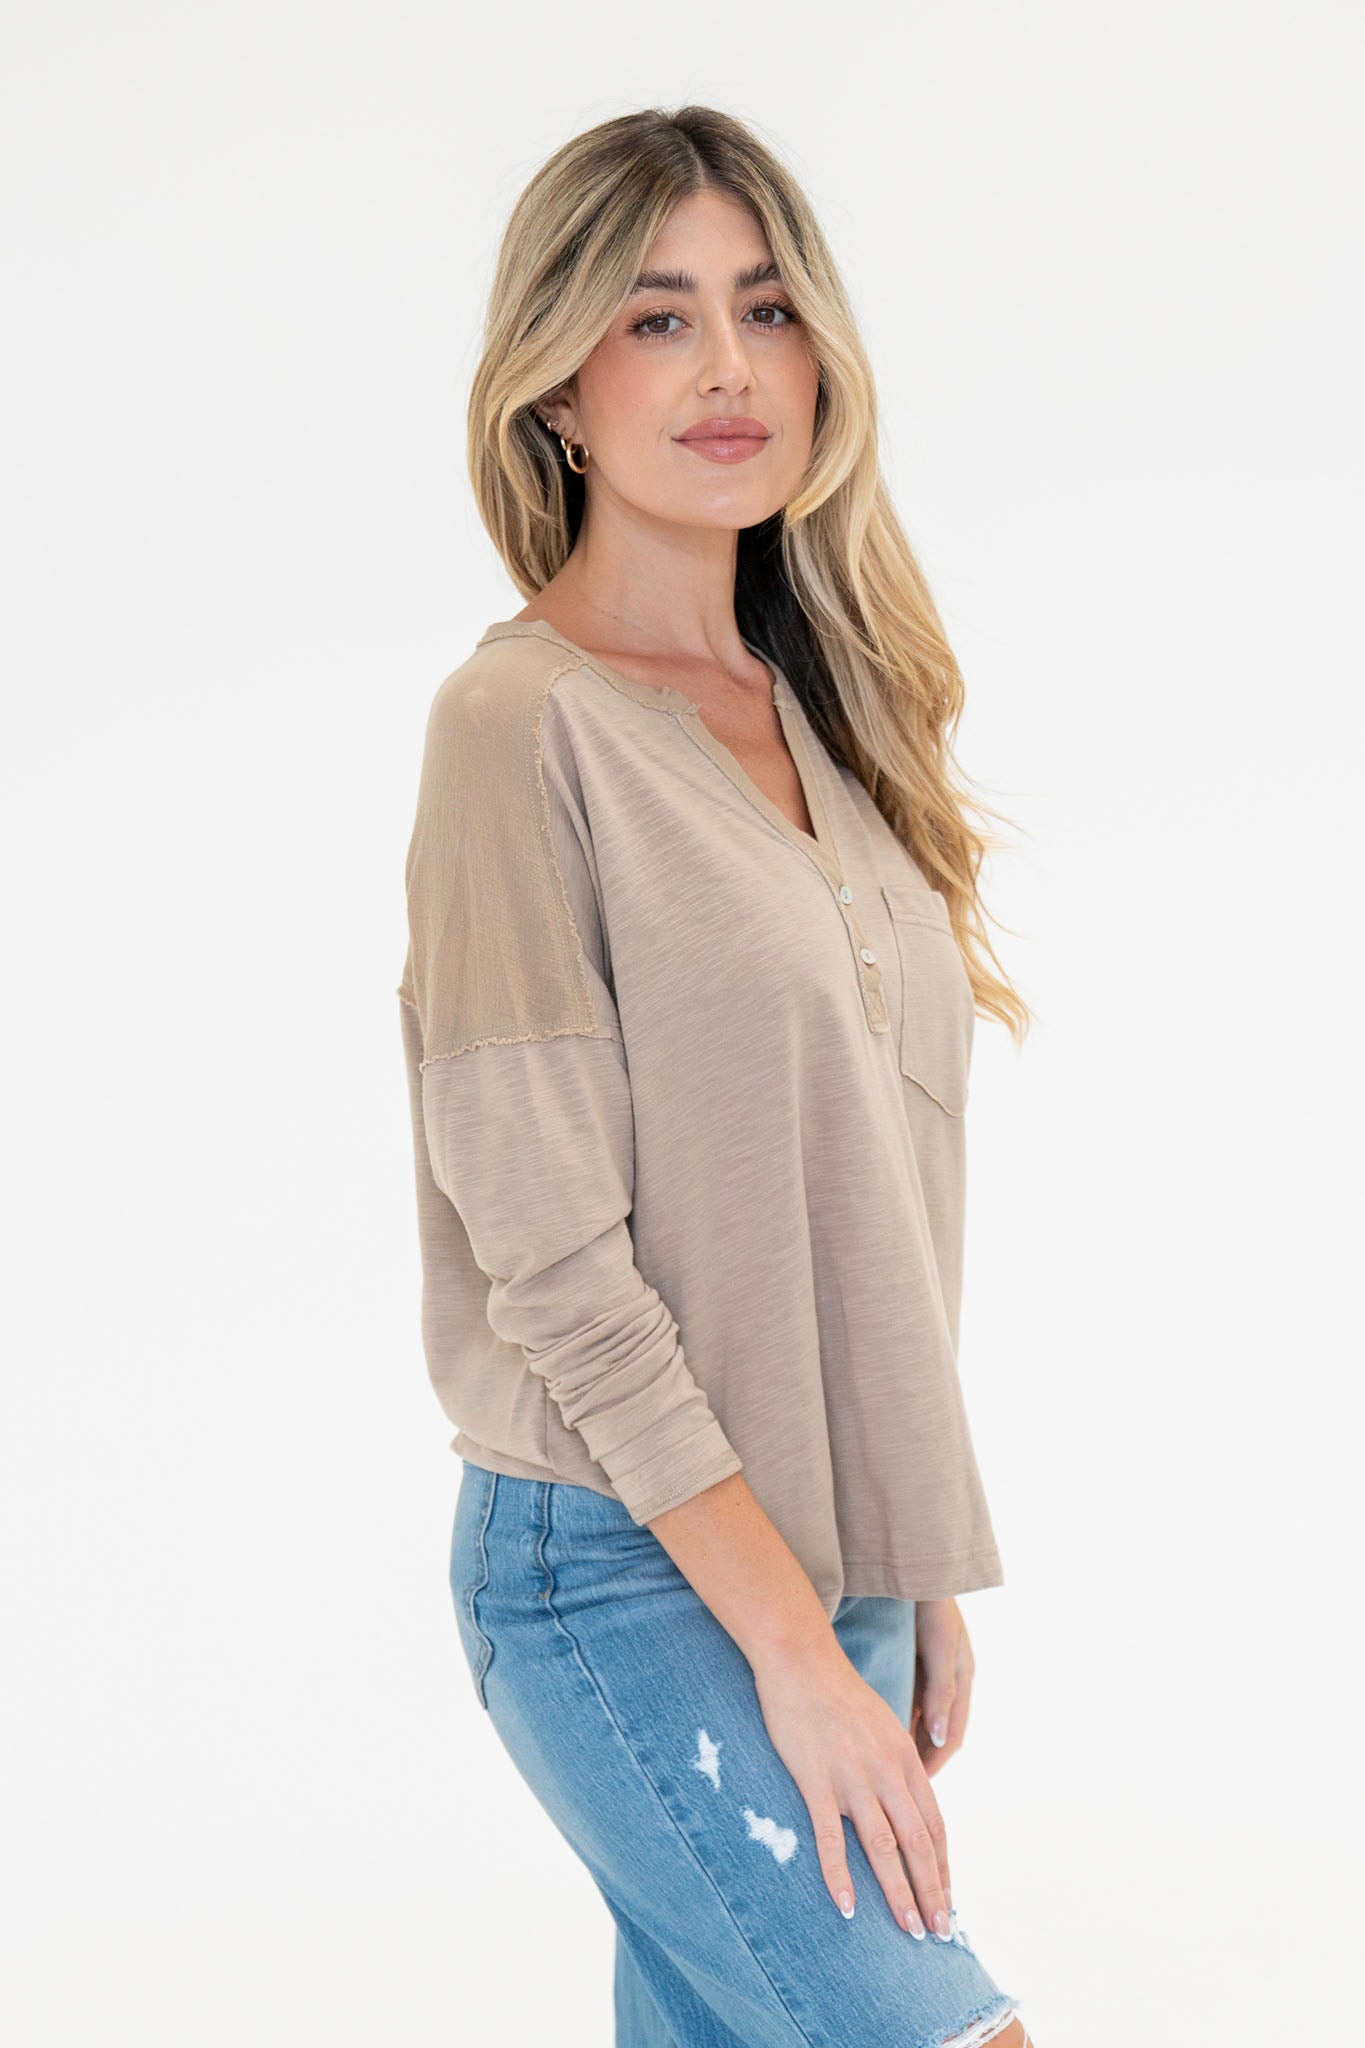 View 4 of Freesia Henley in Taupe, a Tops from Larrea Cove. Detail: .